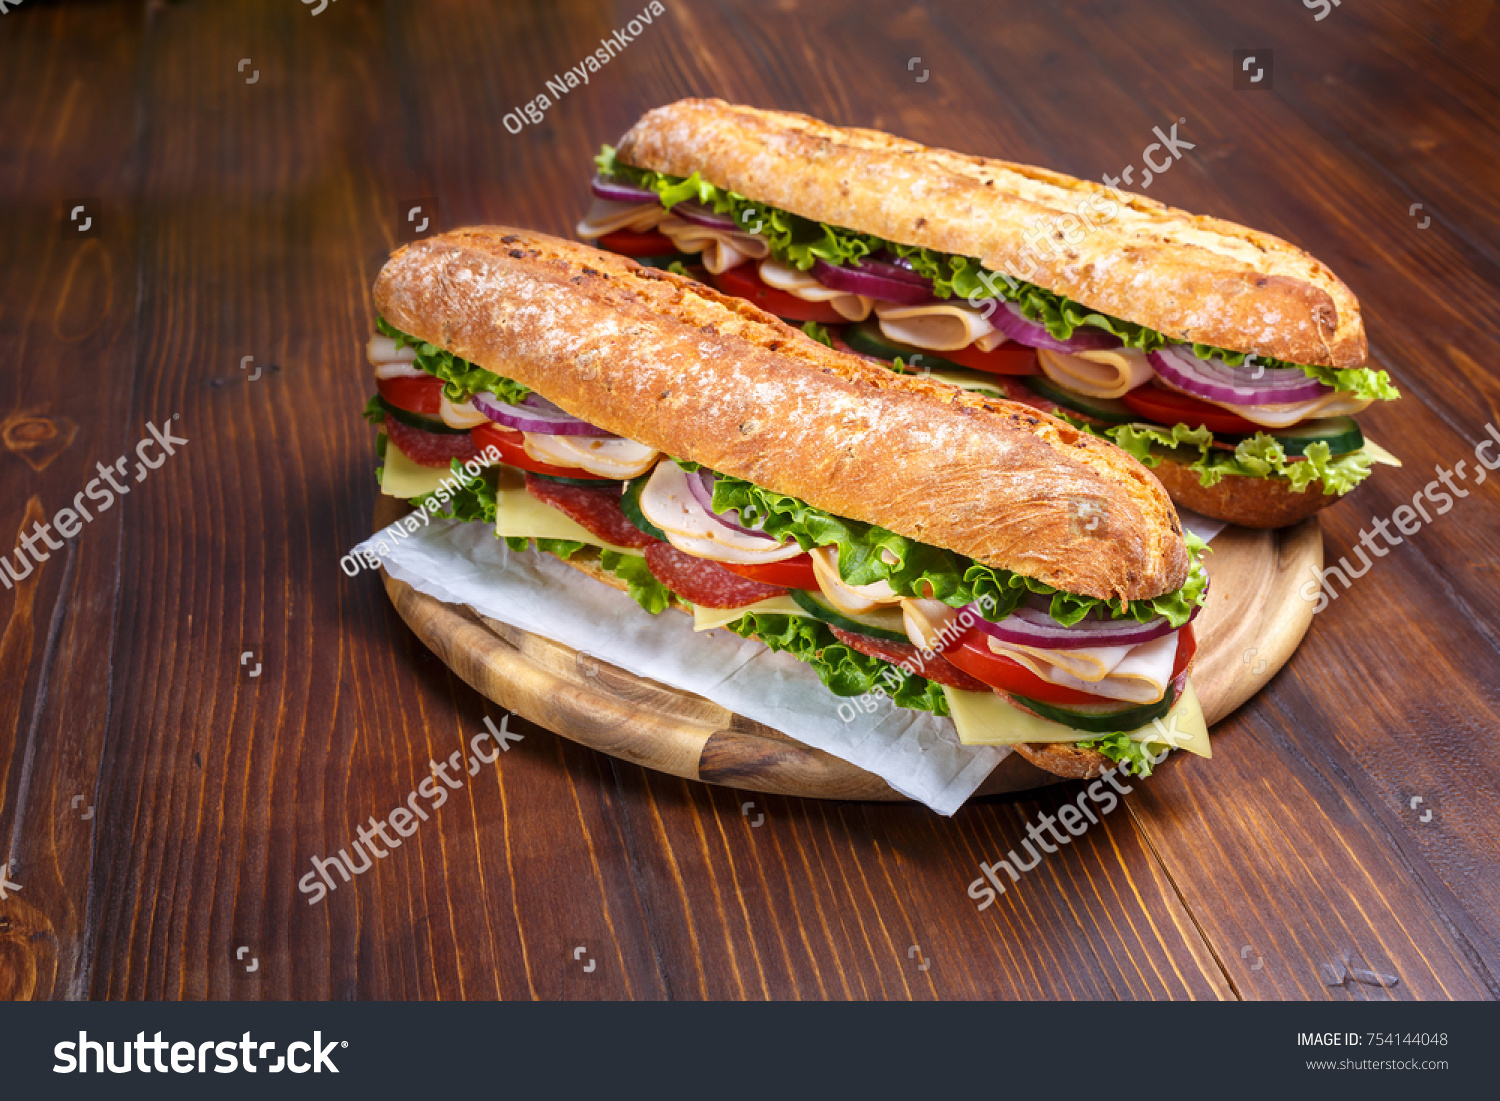 Two baguette sandwiches with salami, turkey breast, cheese, lettuce, tomatoes and onion on a cutting board. Subway sandwiches on a dark background.
 #754144048